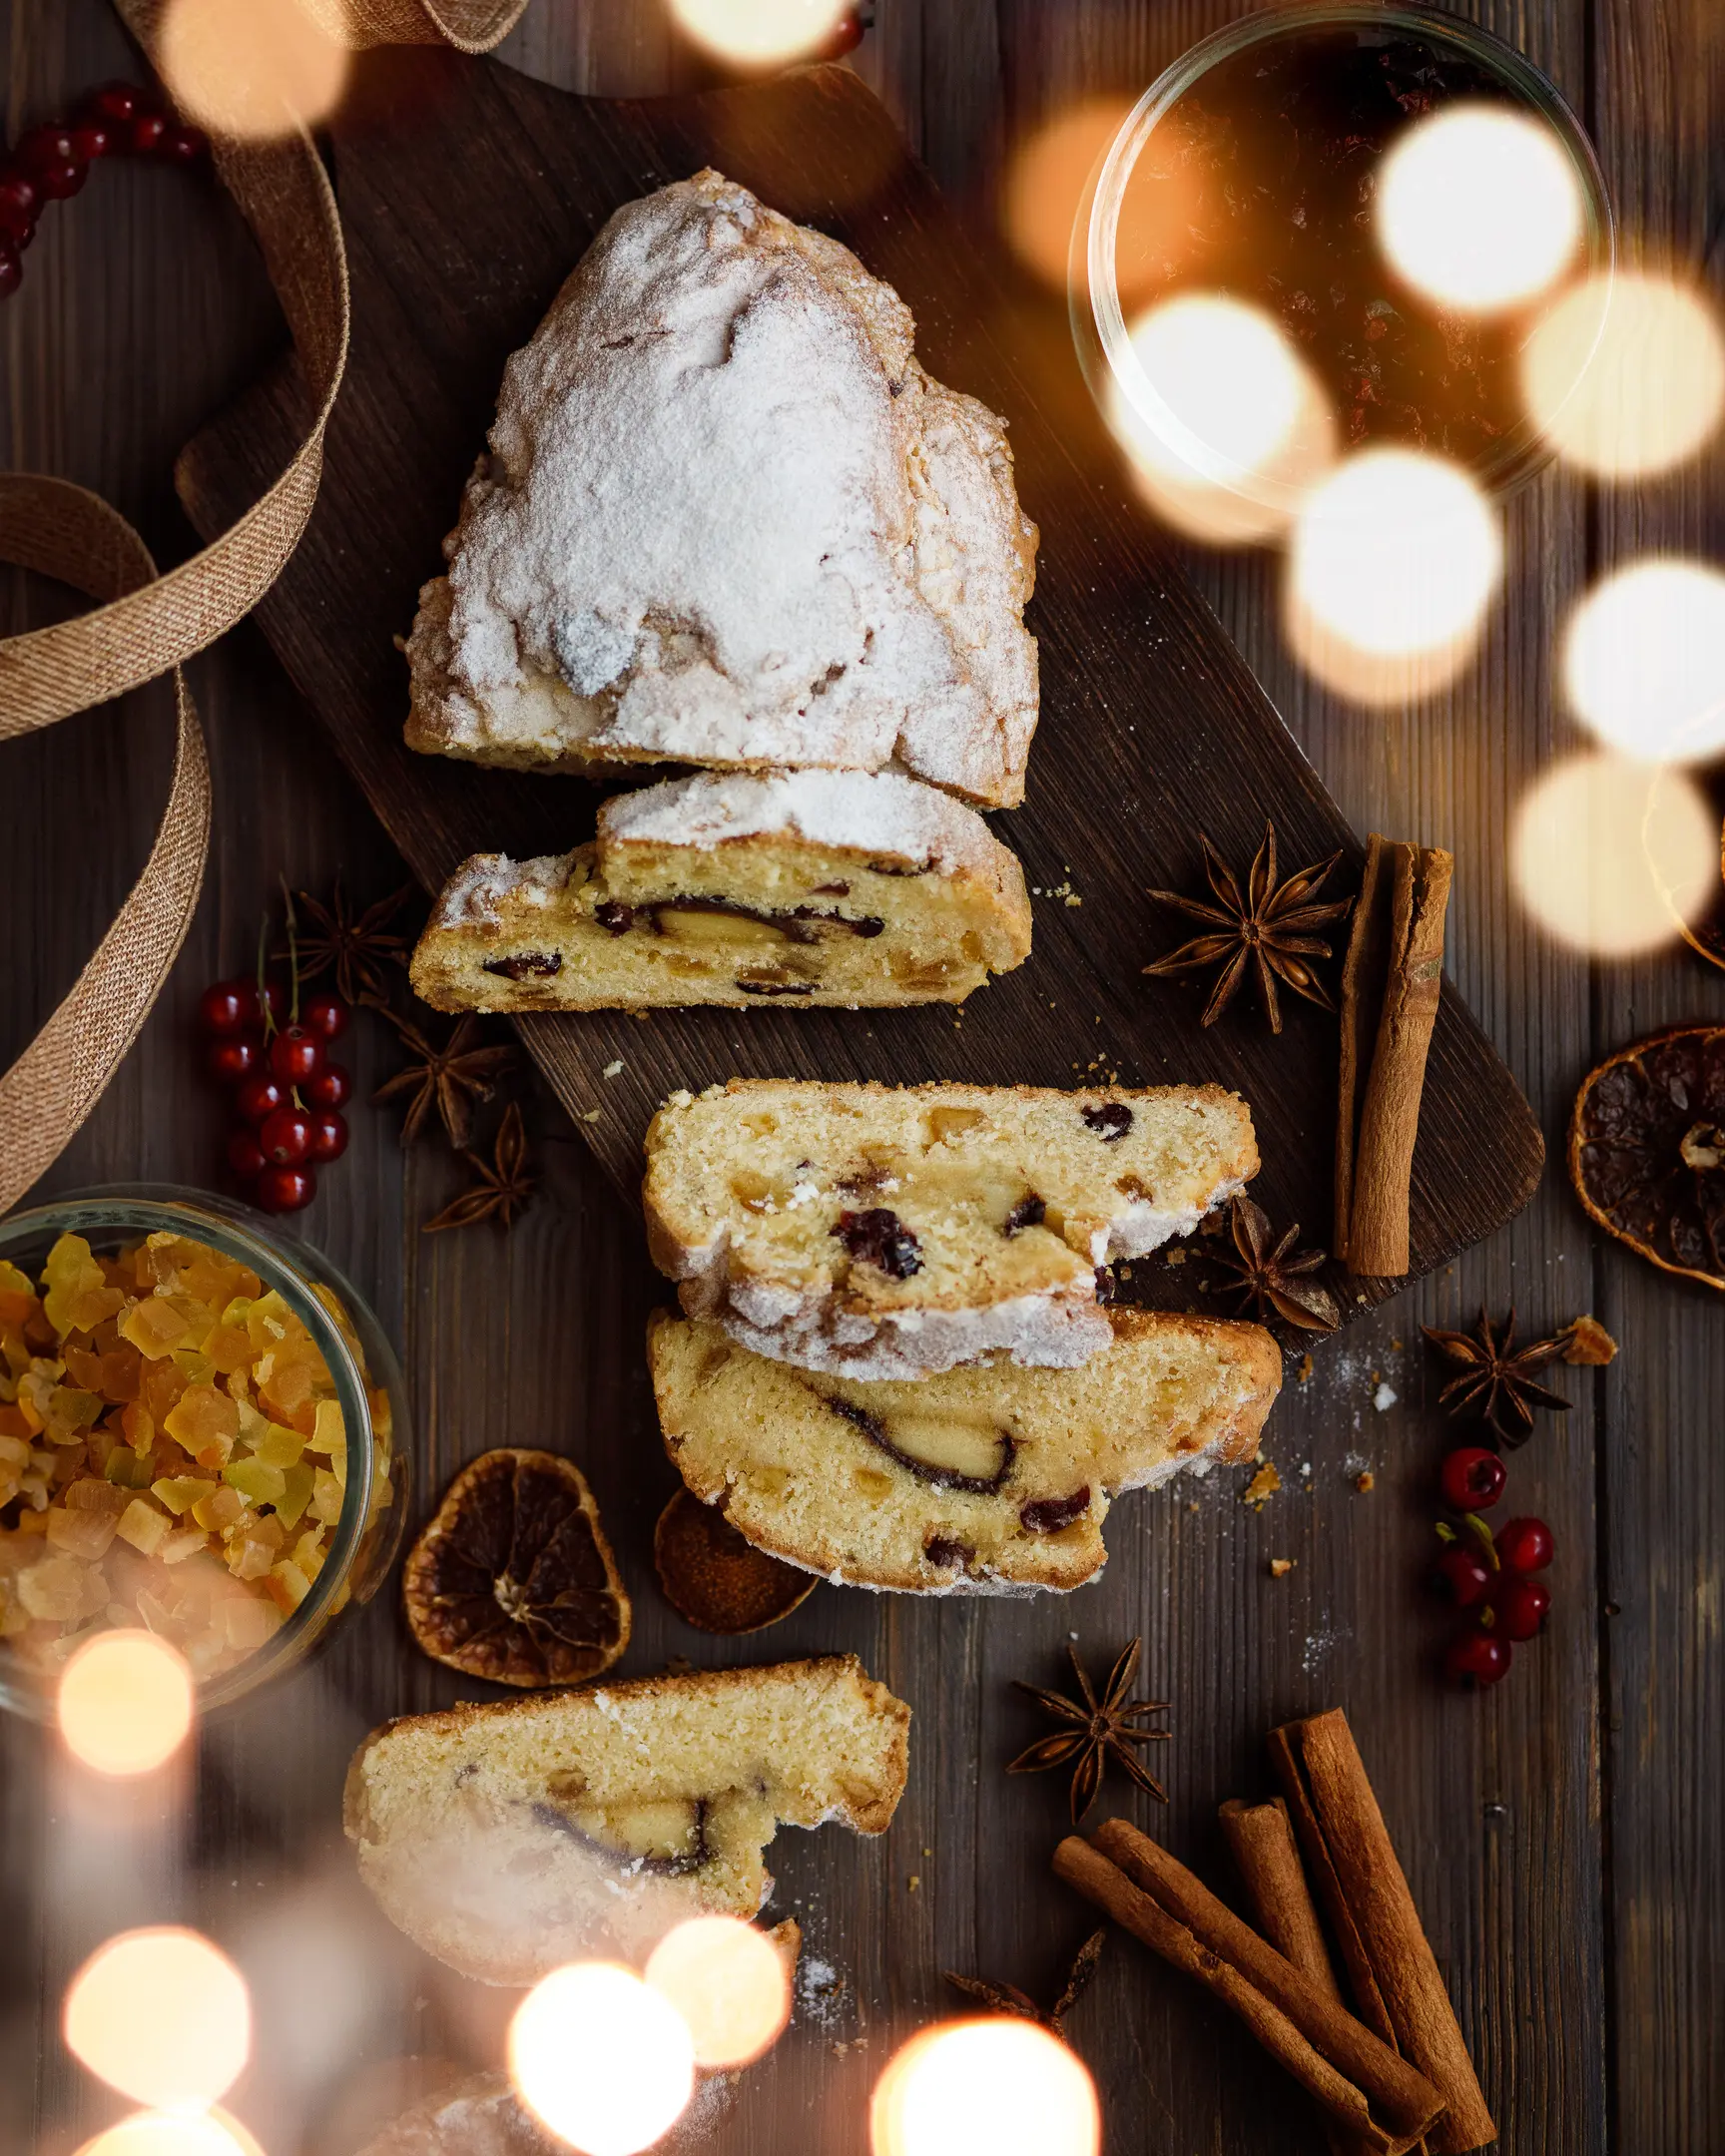 Cut curd Stollen stands on a wooden table.  View from above Cut curd Stollen stands on a wooden table. Around it lie cinnamon and other spices, as well as candied fruits and ribbons for packaging.